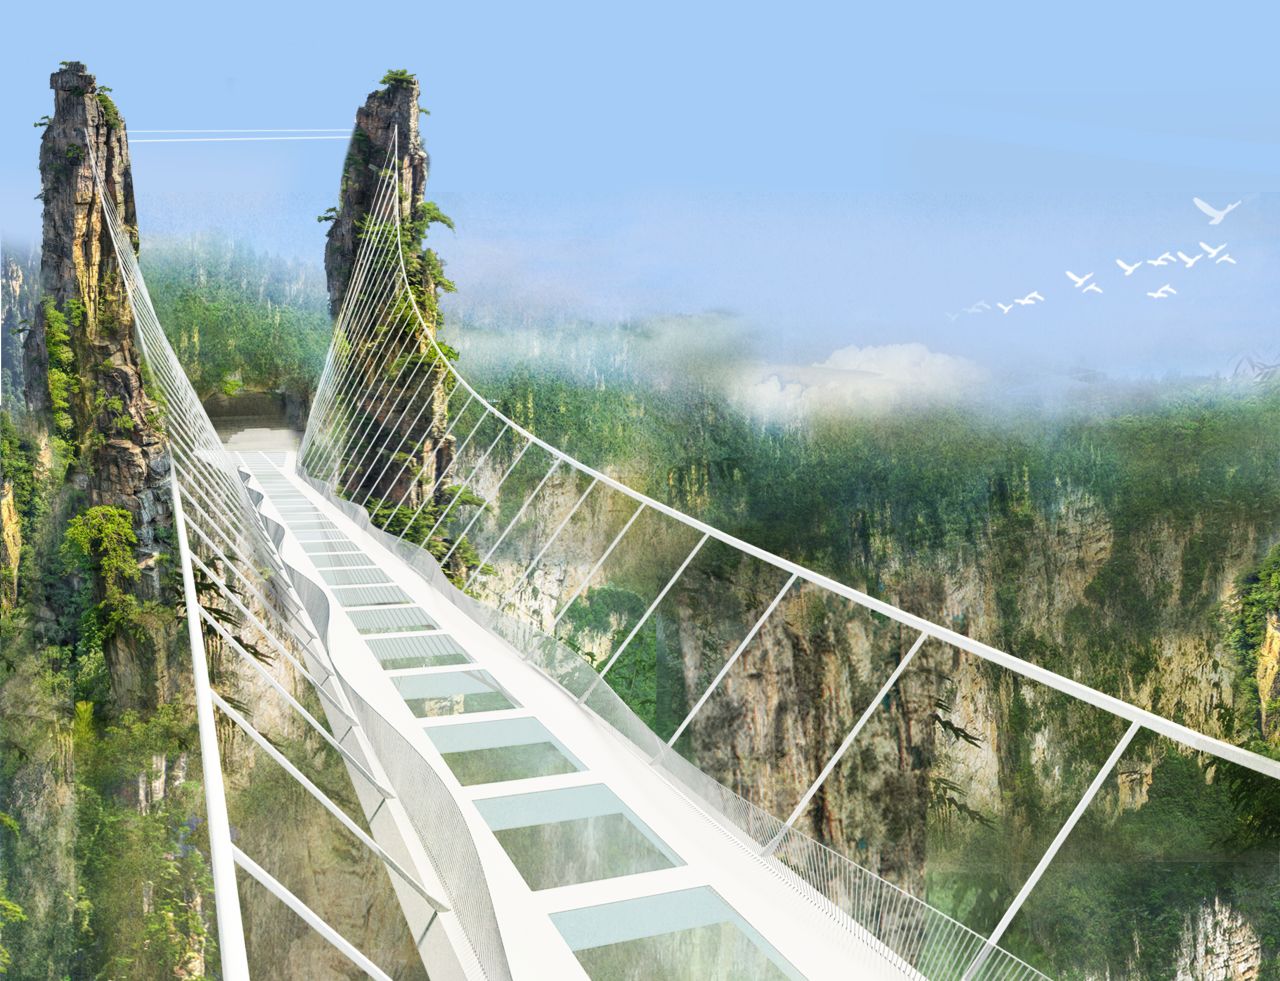 Also in Hunan Province, another glass-bottomed suspension bridge is planned for the Zhangjiajie Great Canyon area. When completed, the structure will be the world's highest and longest glass bridge.